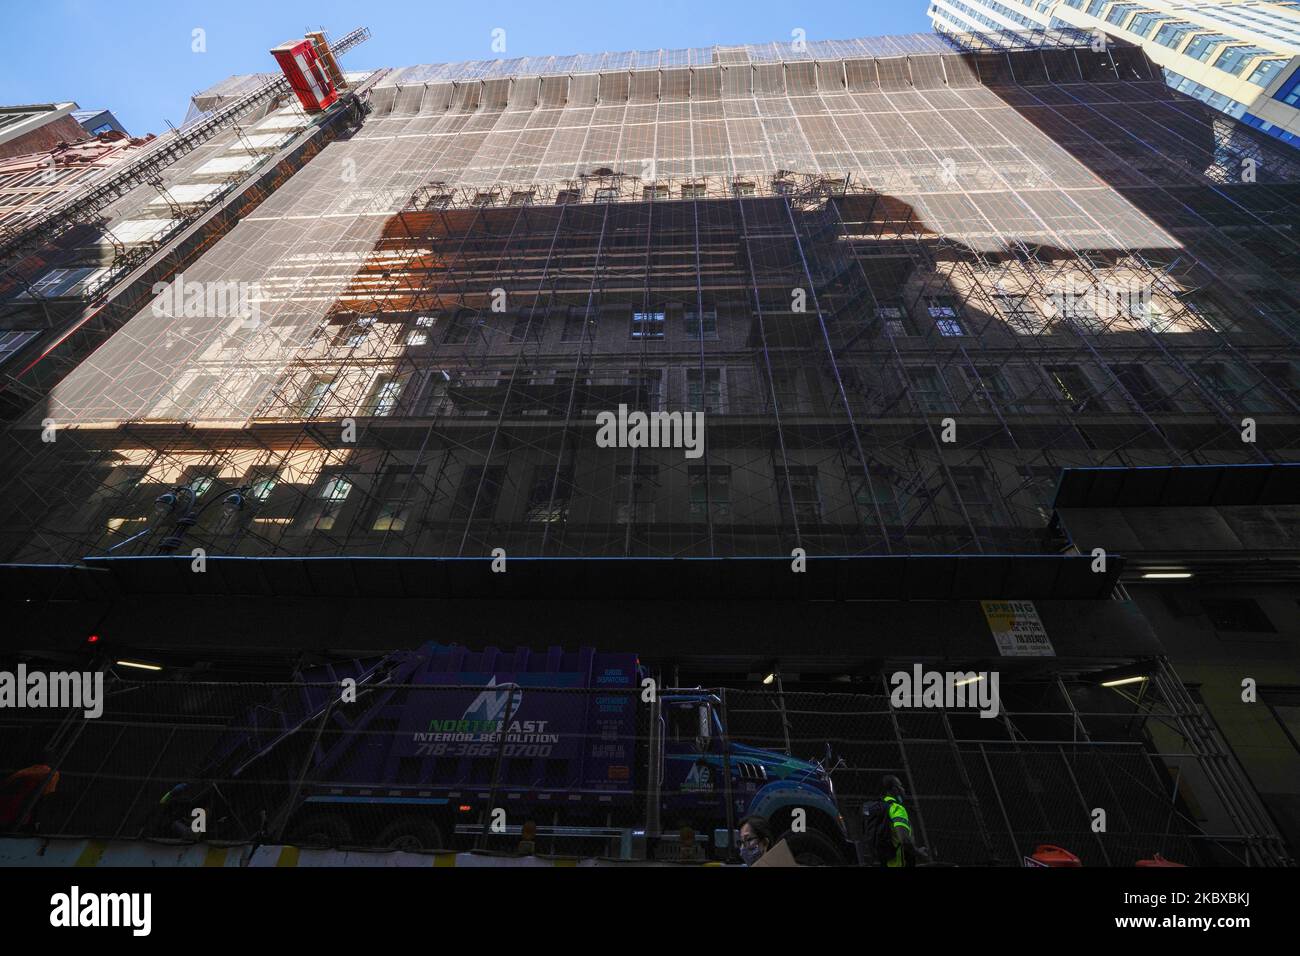 A view of an ongoing construction of the former Lord and Taylor Flagship Store which has been recently purchased by the retail giant Amazon as New York City continues Phase 4 of re-opening following restrictions imposed to slow the spread of coronavirus on August 20, 2020 in New York City. The fourth phase allows outdoor arts and entertainment, sporting events without fans and media production. Amazon adding 2,000 jobs at NYC’s Lord & Taylor building, report says. (Photo by John Nacion/NurPhoto) Stock Photo